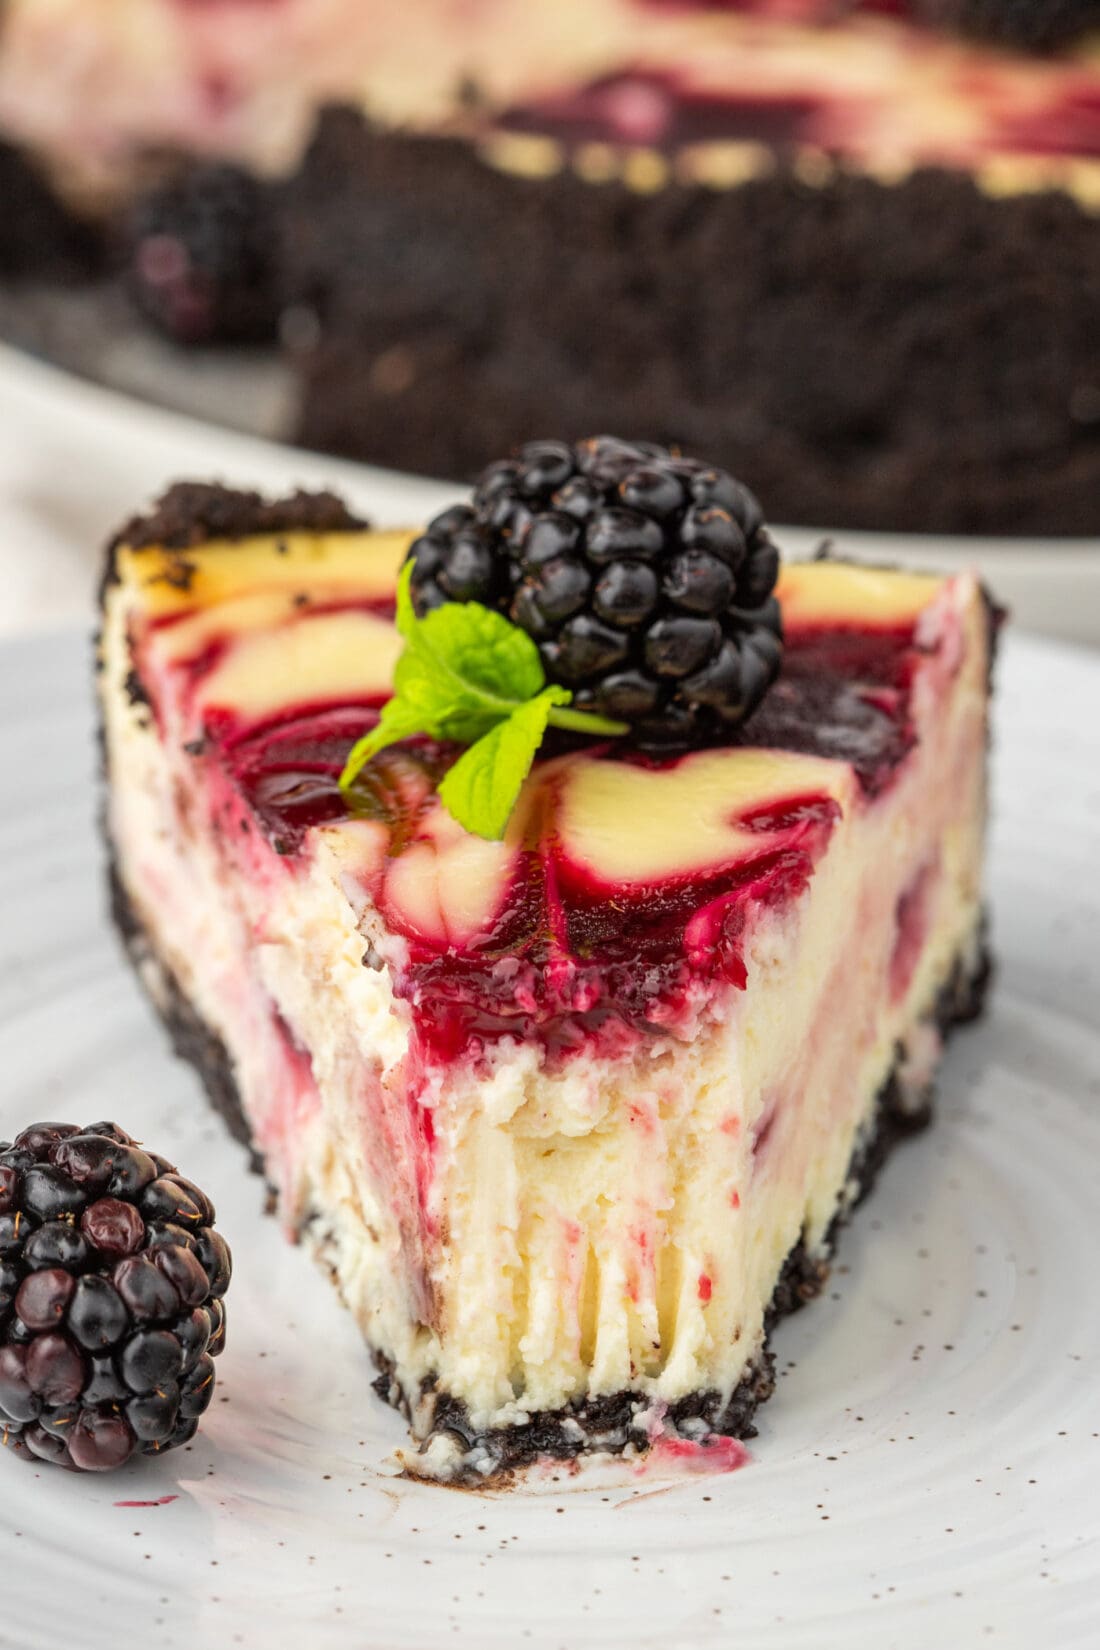 Slice of Blackberry Swirl Cheesecake on a plate with a bite taken out